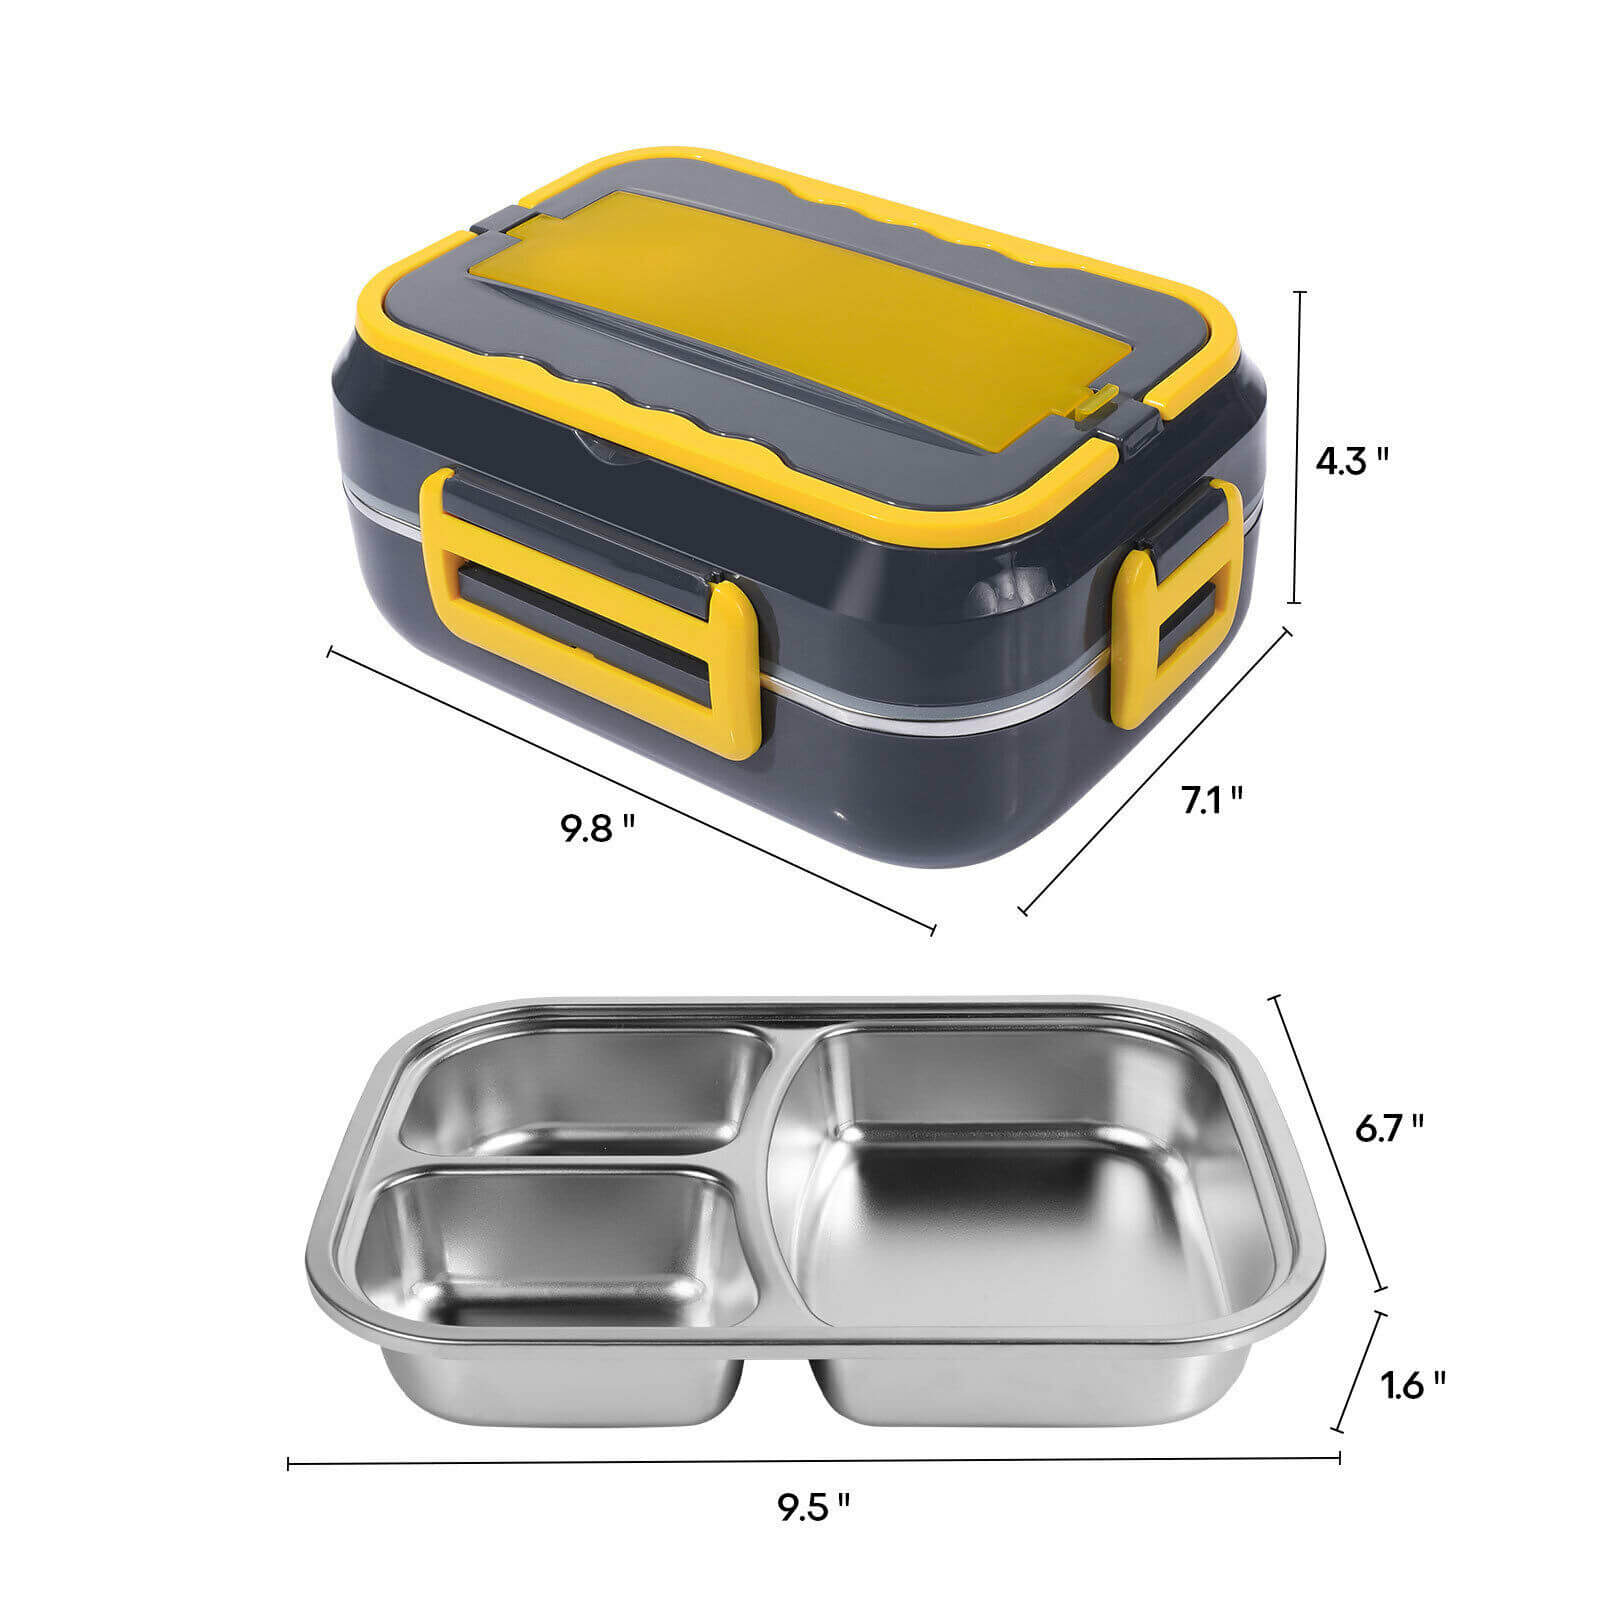 Size of 1.5L 40W Portable Electric Lunch Box Food Warmer w/ Bag